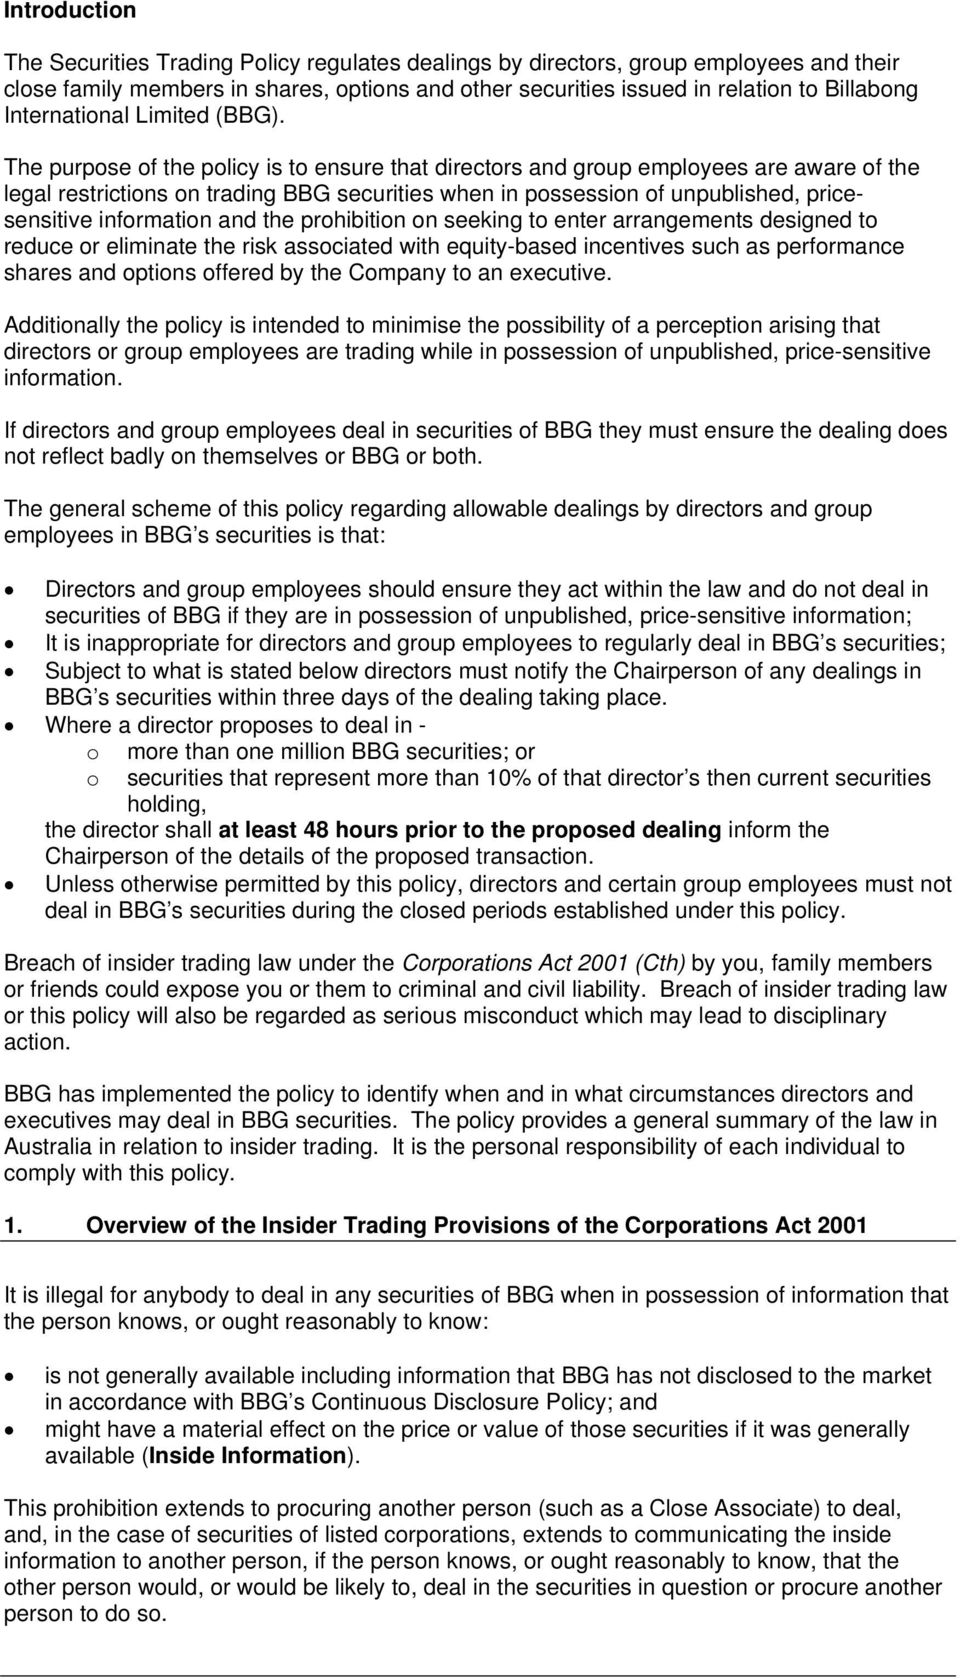 The purpose of the policy is to ensure that directors and group employees are aware of the legal restrictions on trading BBG securities when in possession of unpublished, pricesensitive information